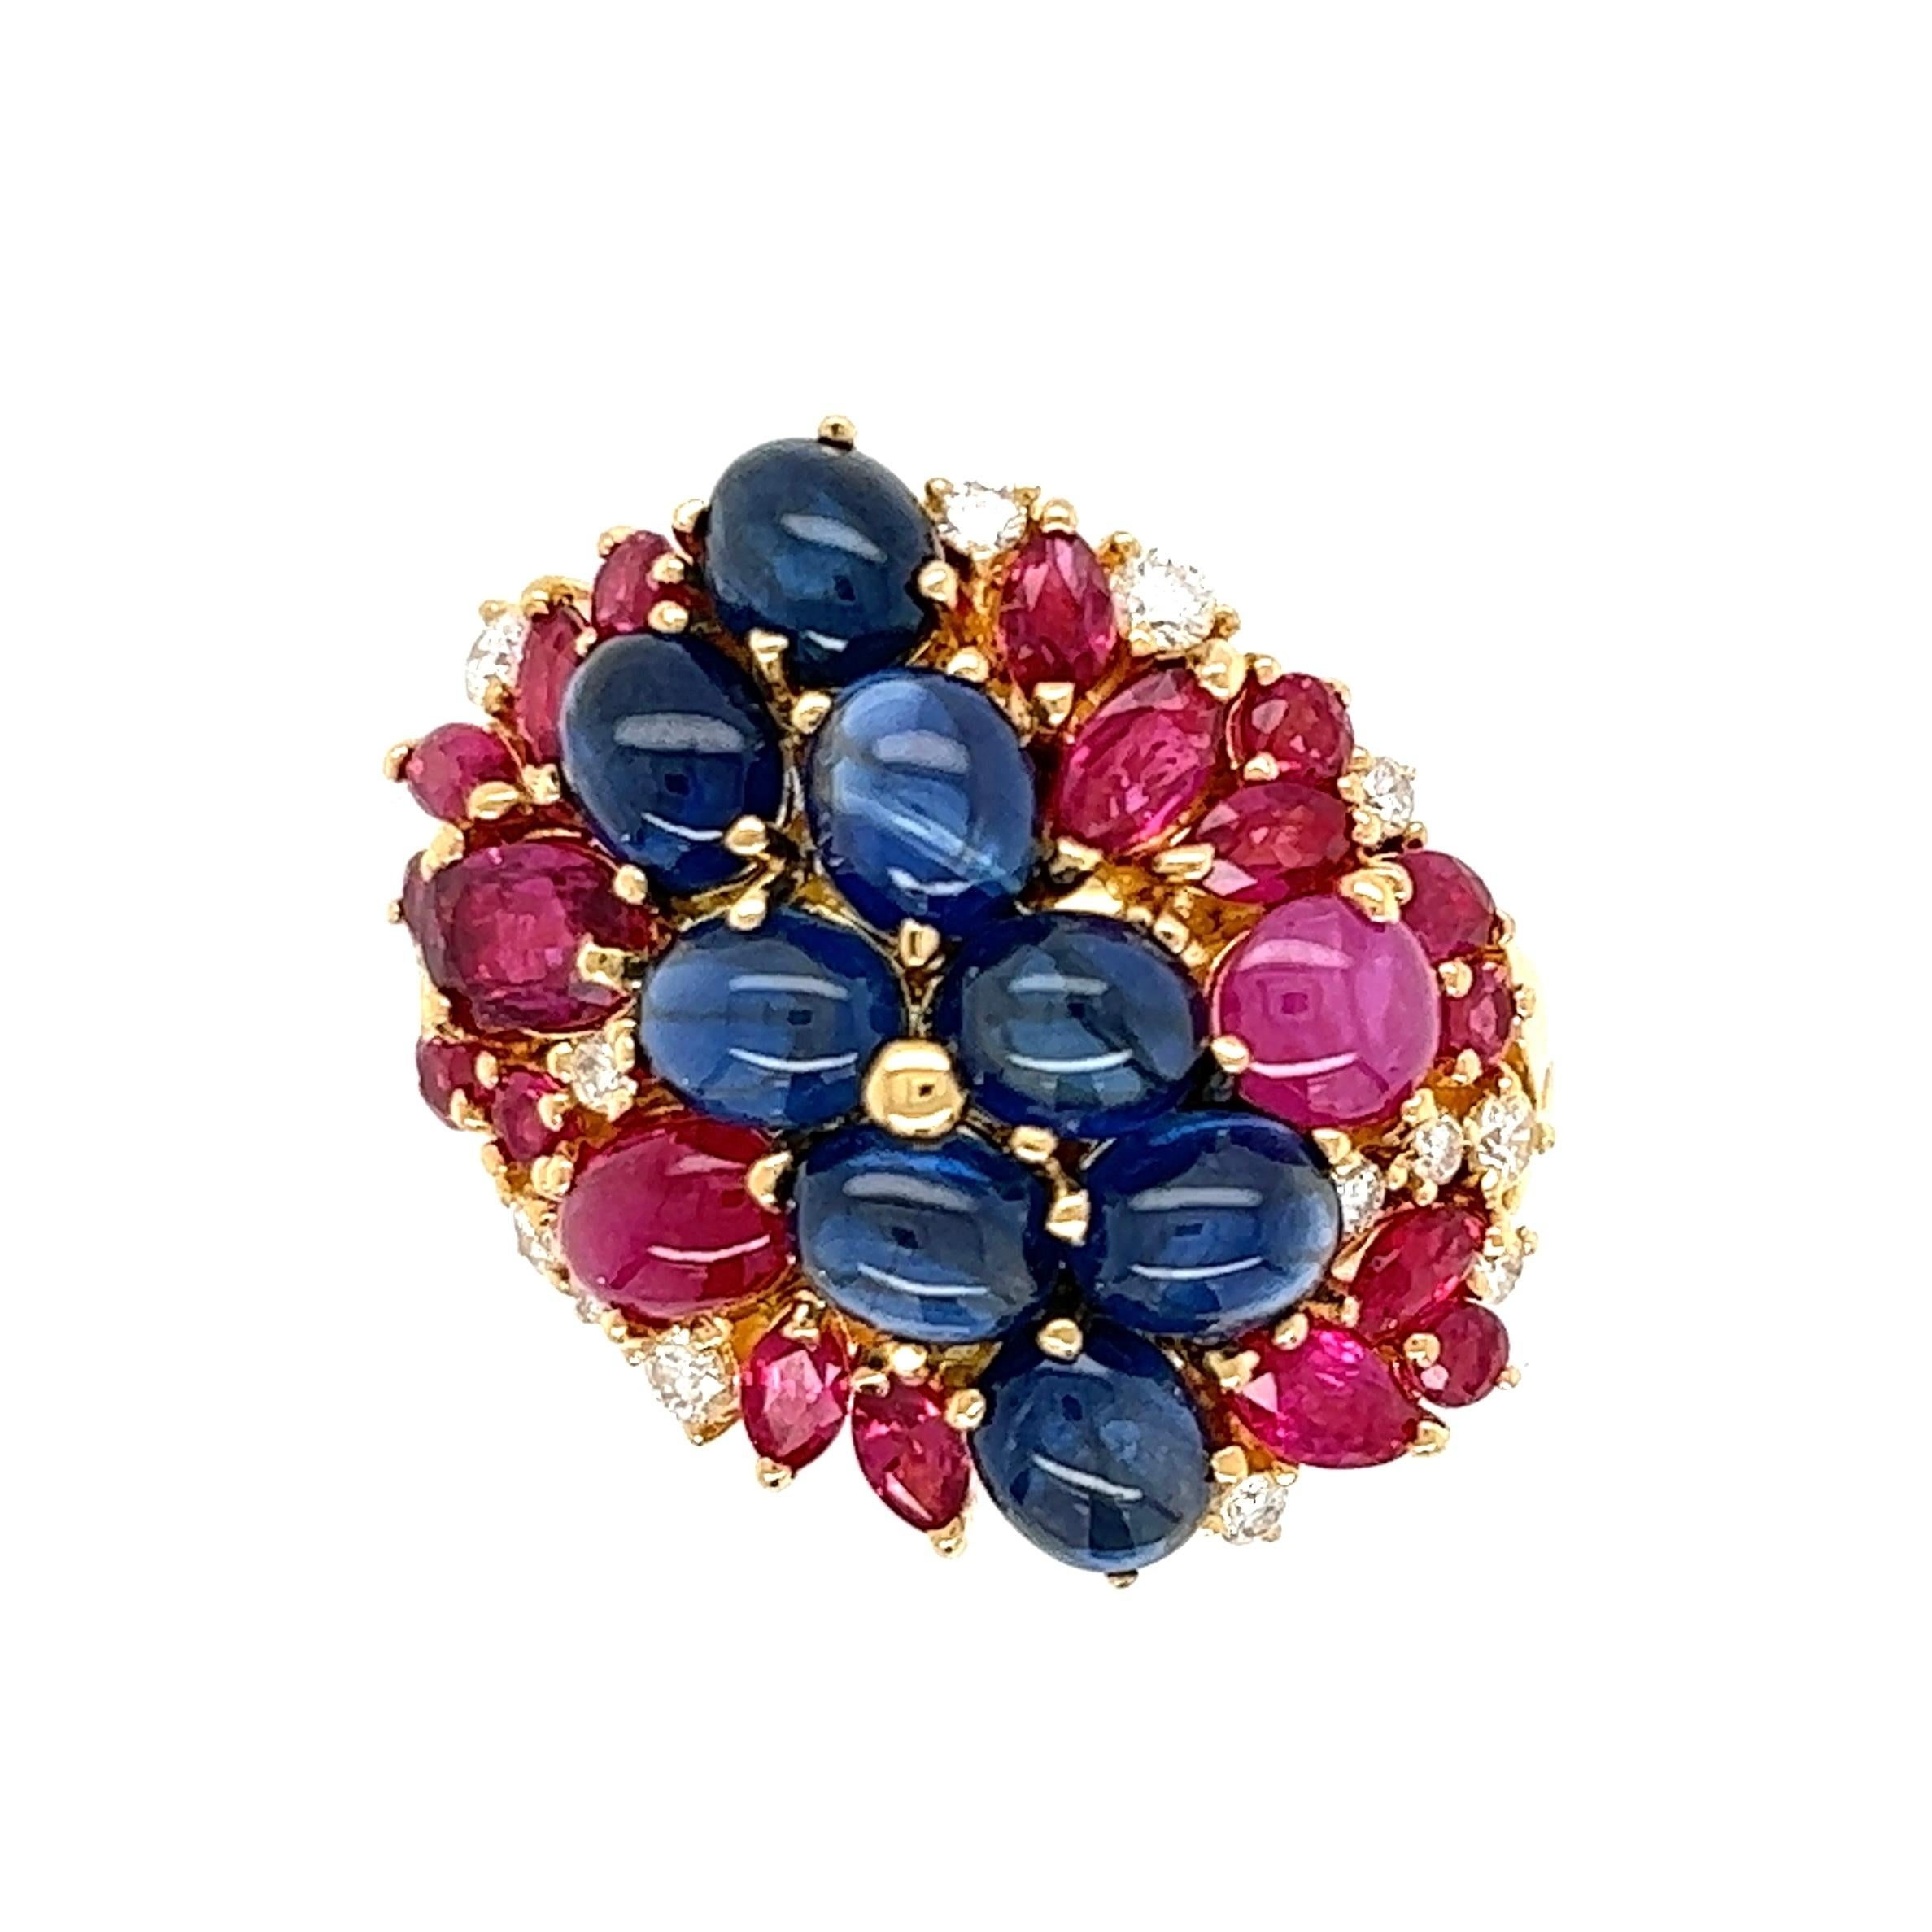 Simply Beautiful! Finely detailed Gold Cocktail Cluster Ring. Hand set with Sapphires, Rubies, weighing approx. 7.26tcw and Round Brilliant-Cut Diamonds, approx. 0.26tcw. Ring size 6; we offer ring re-sizing. Measures approx. 1.04” L 0.86” W x 0.84”